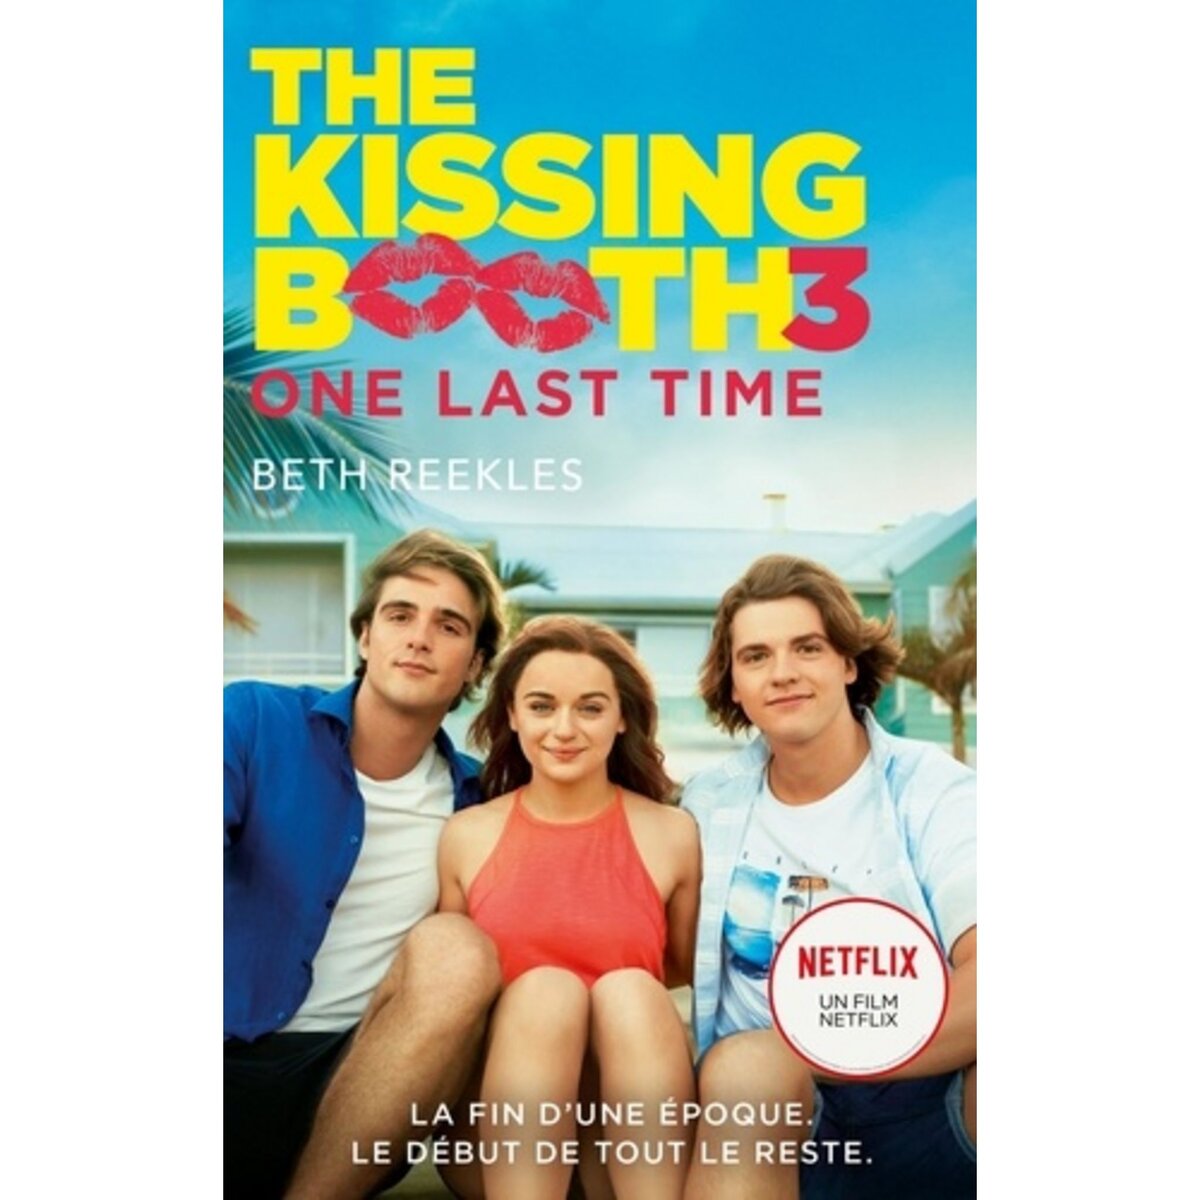  THE KISSING BOOTH TOME 3 : ONE LAST TIME, Reekles Beth